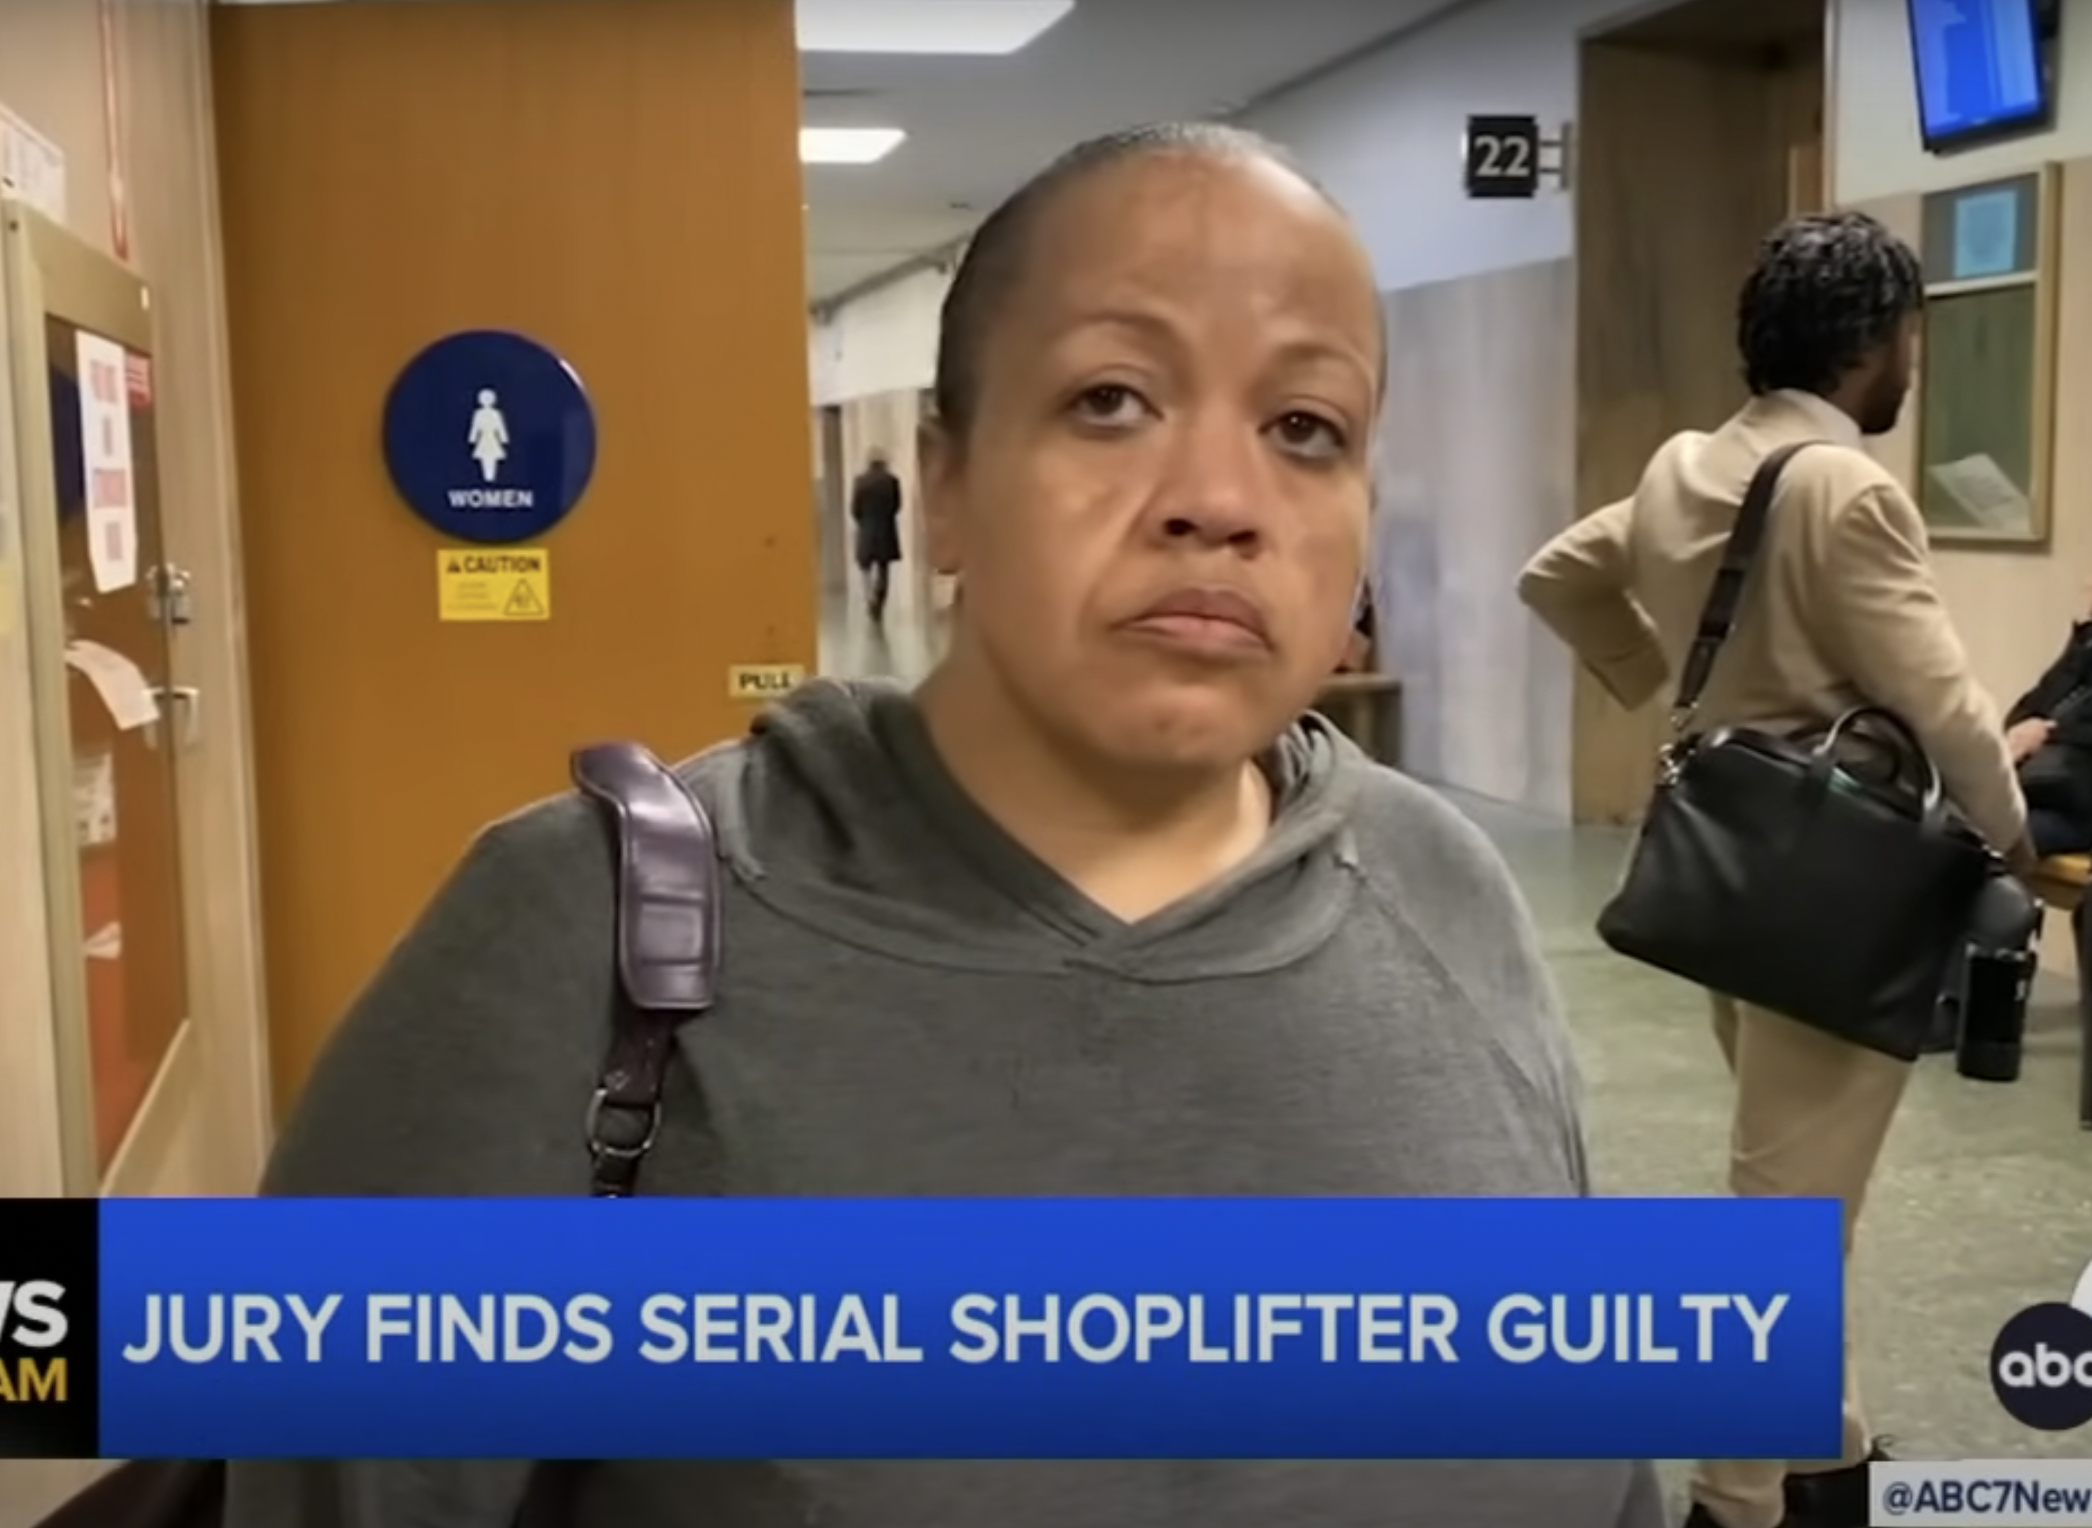 SHOCKING: San Francisco Woman Convicted of Shoplifting Spree, Stole $60,000 Worth of Items in Over 120 Visits to Target